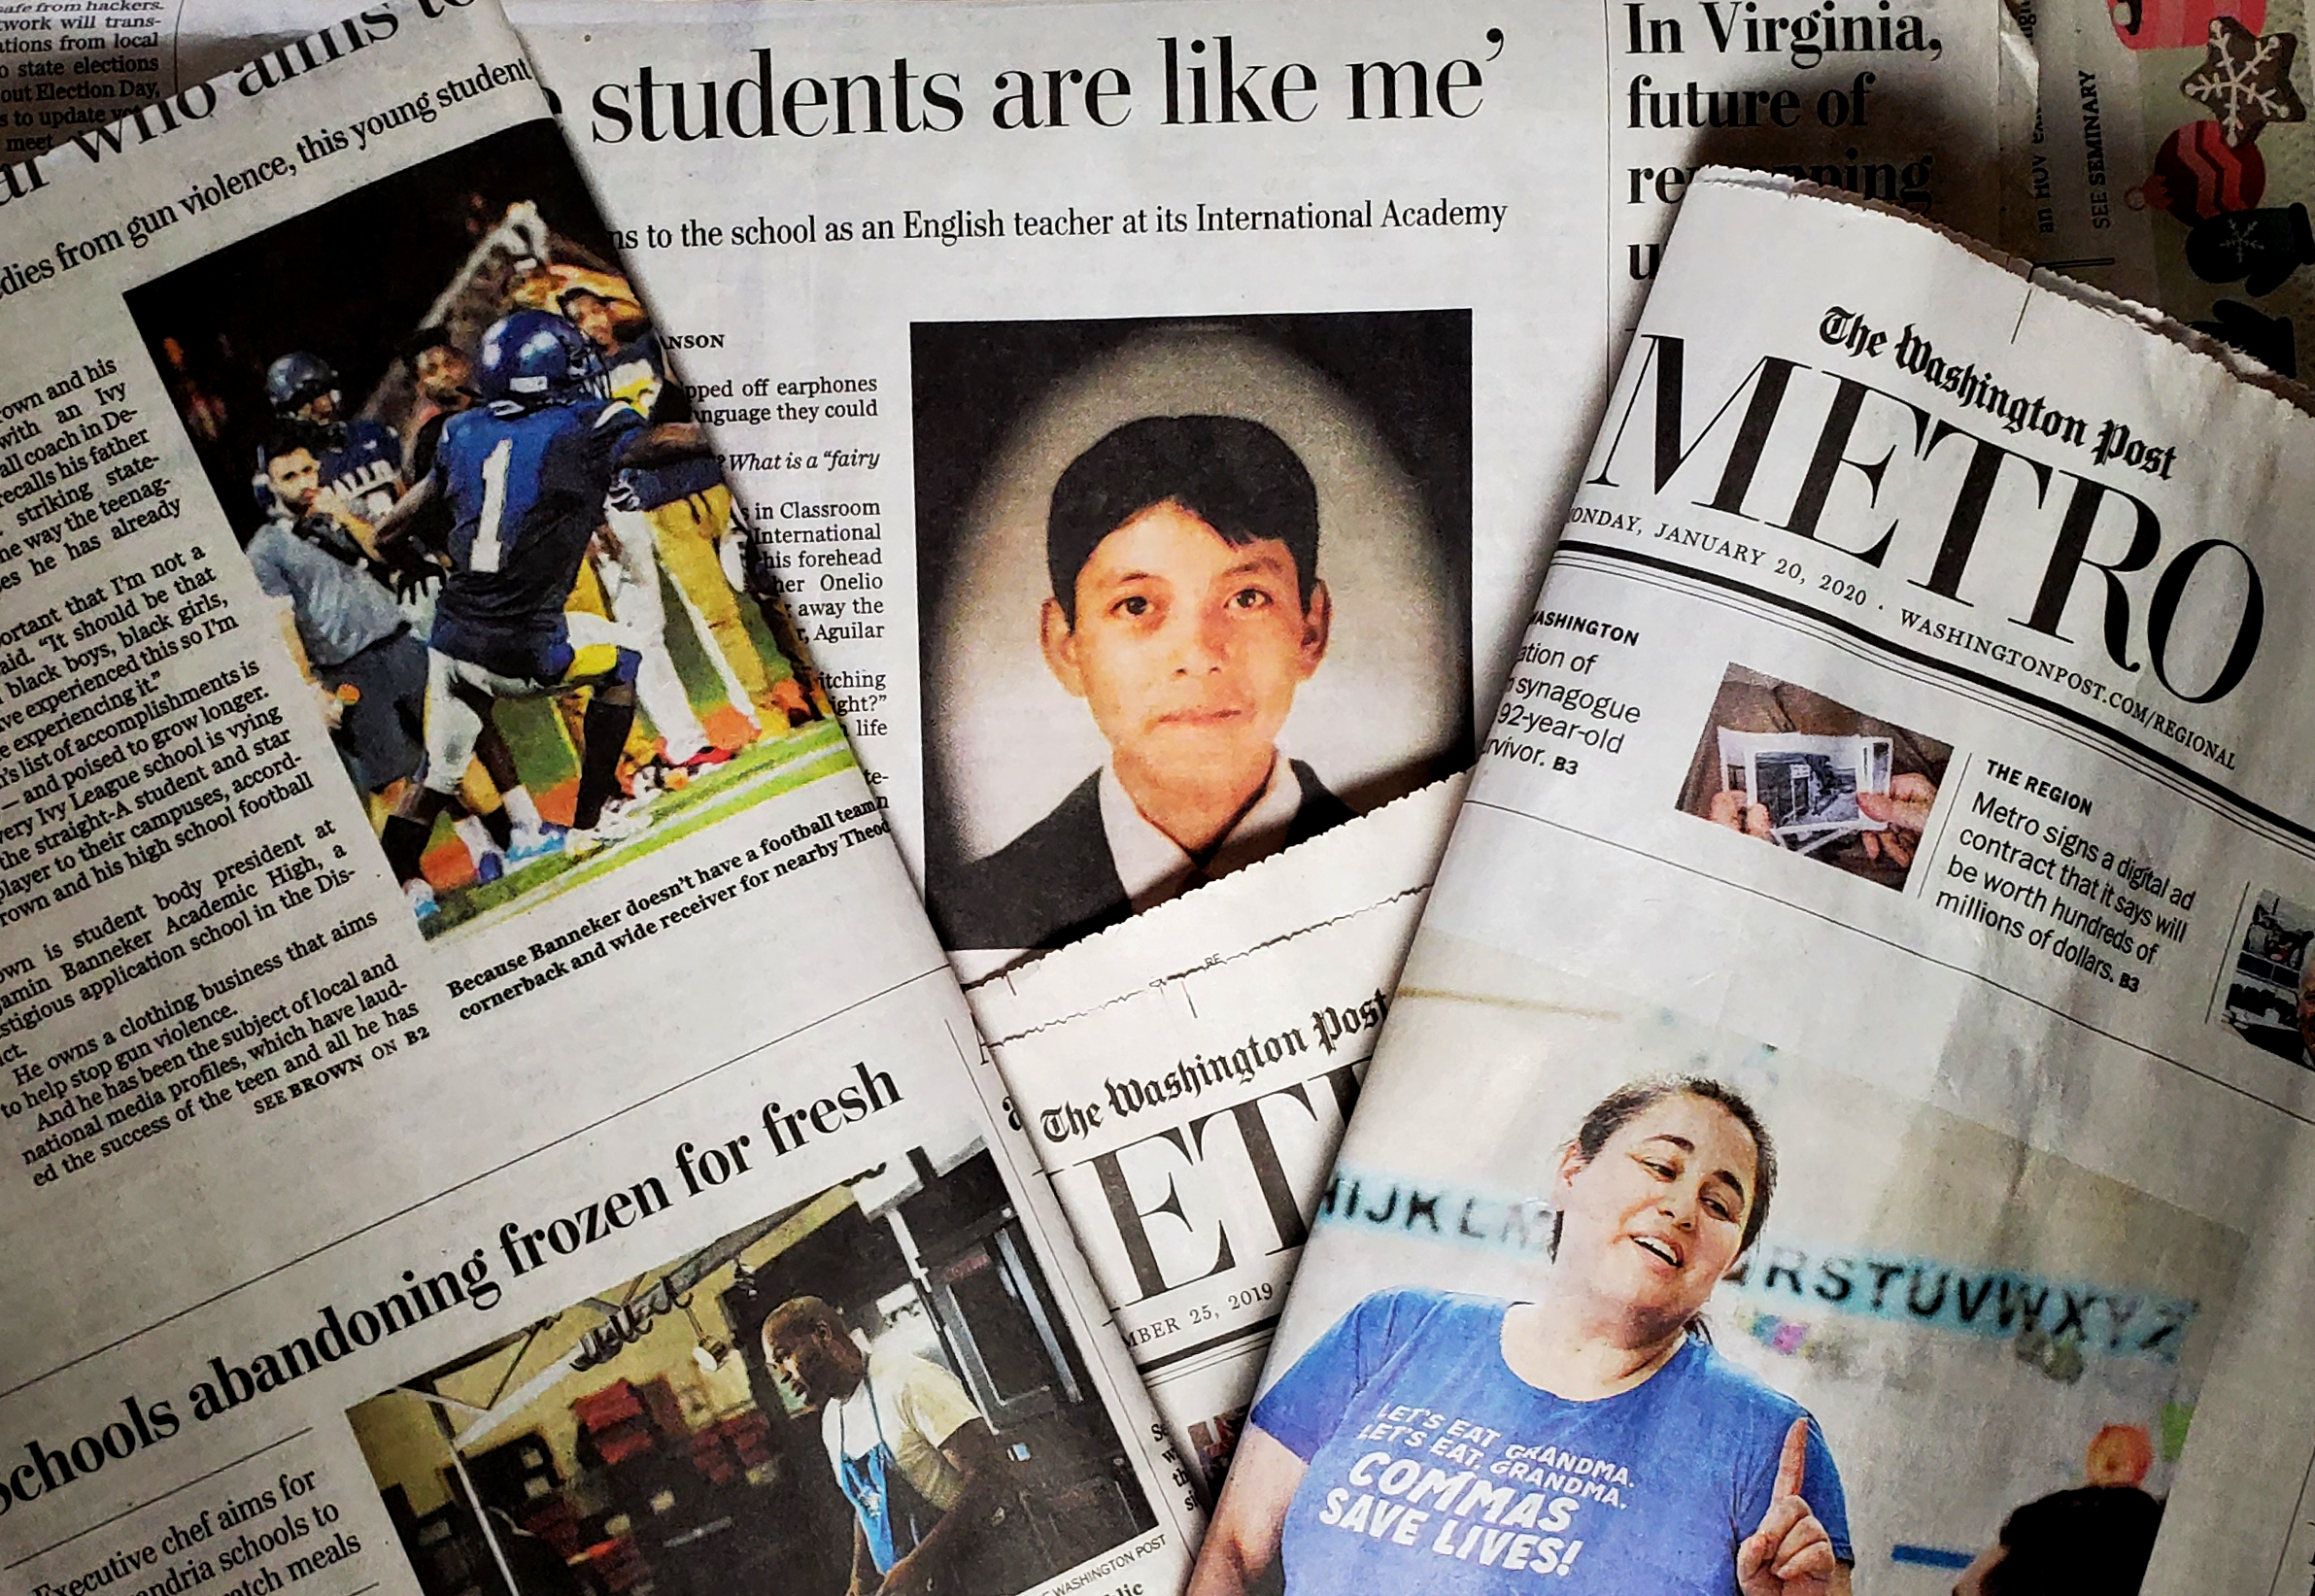 Washington Post Metro section covers with ACPS stories